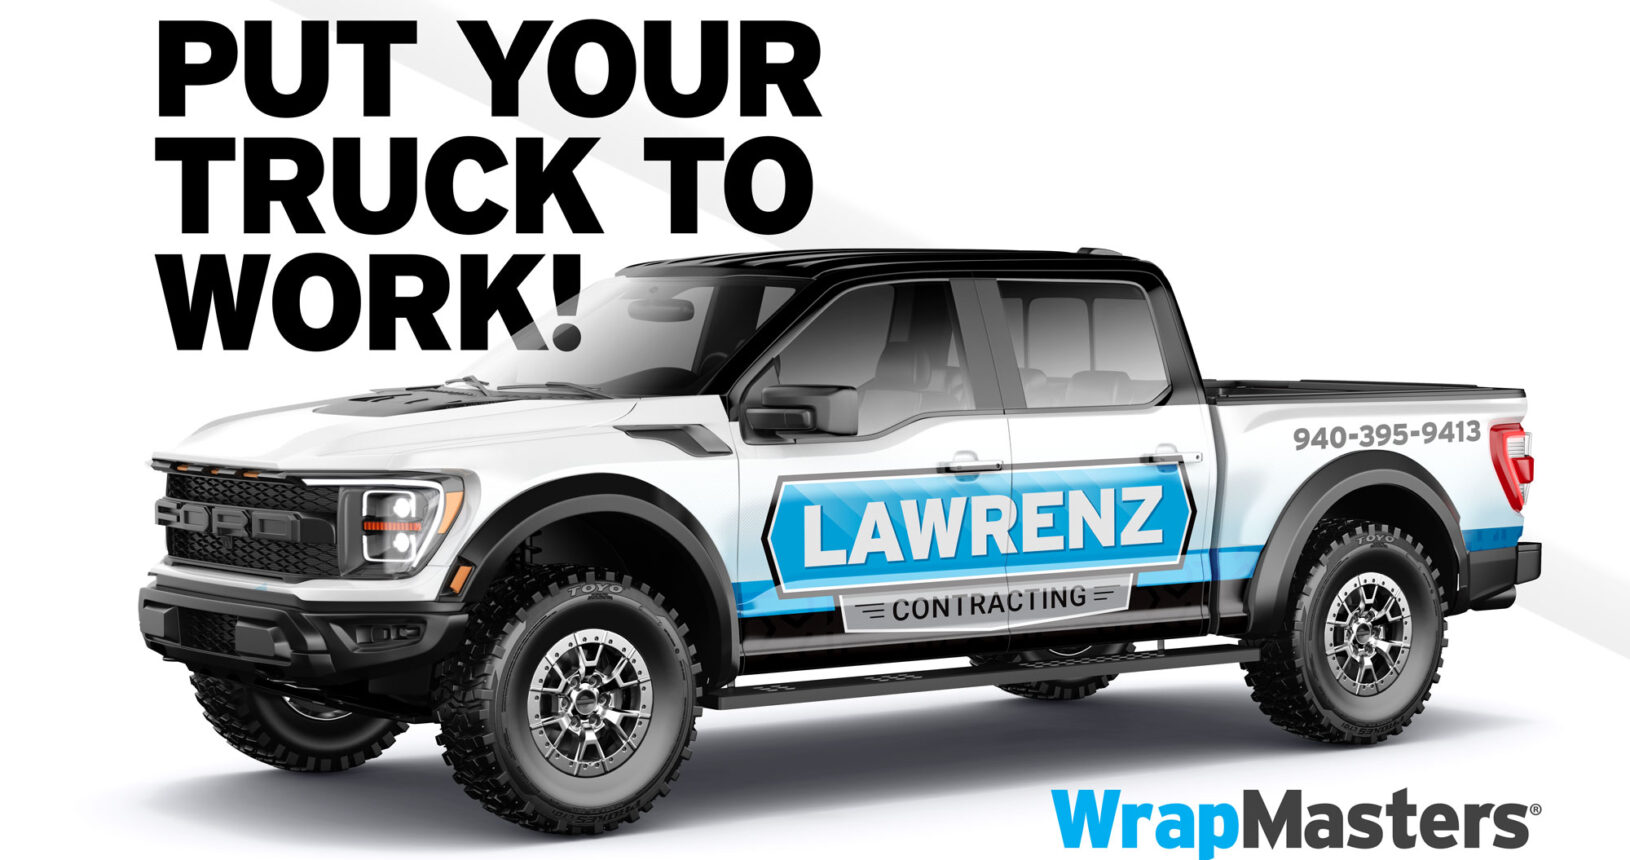 Home Service Branding Truck Wrap with Black Top and Blue Logo for Lawrenz Roofing